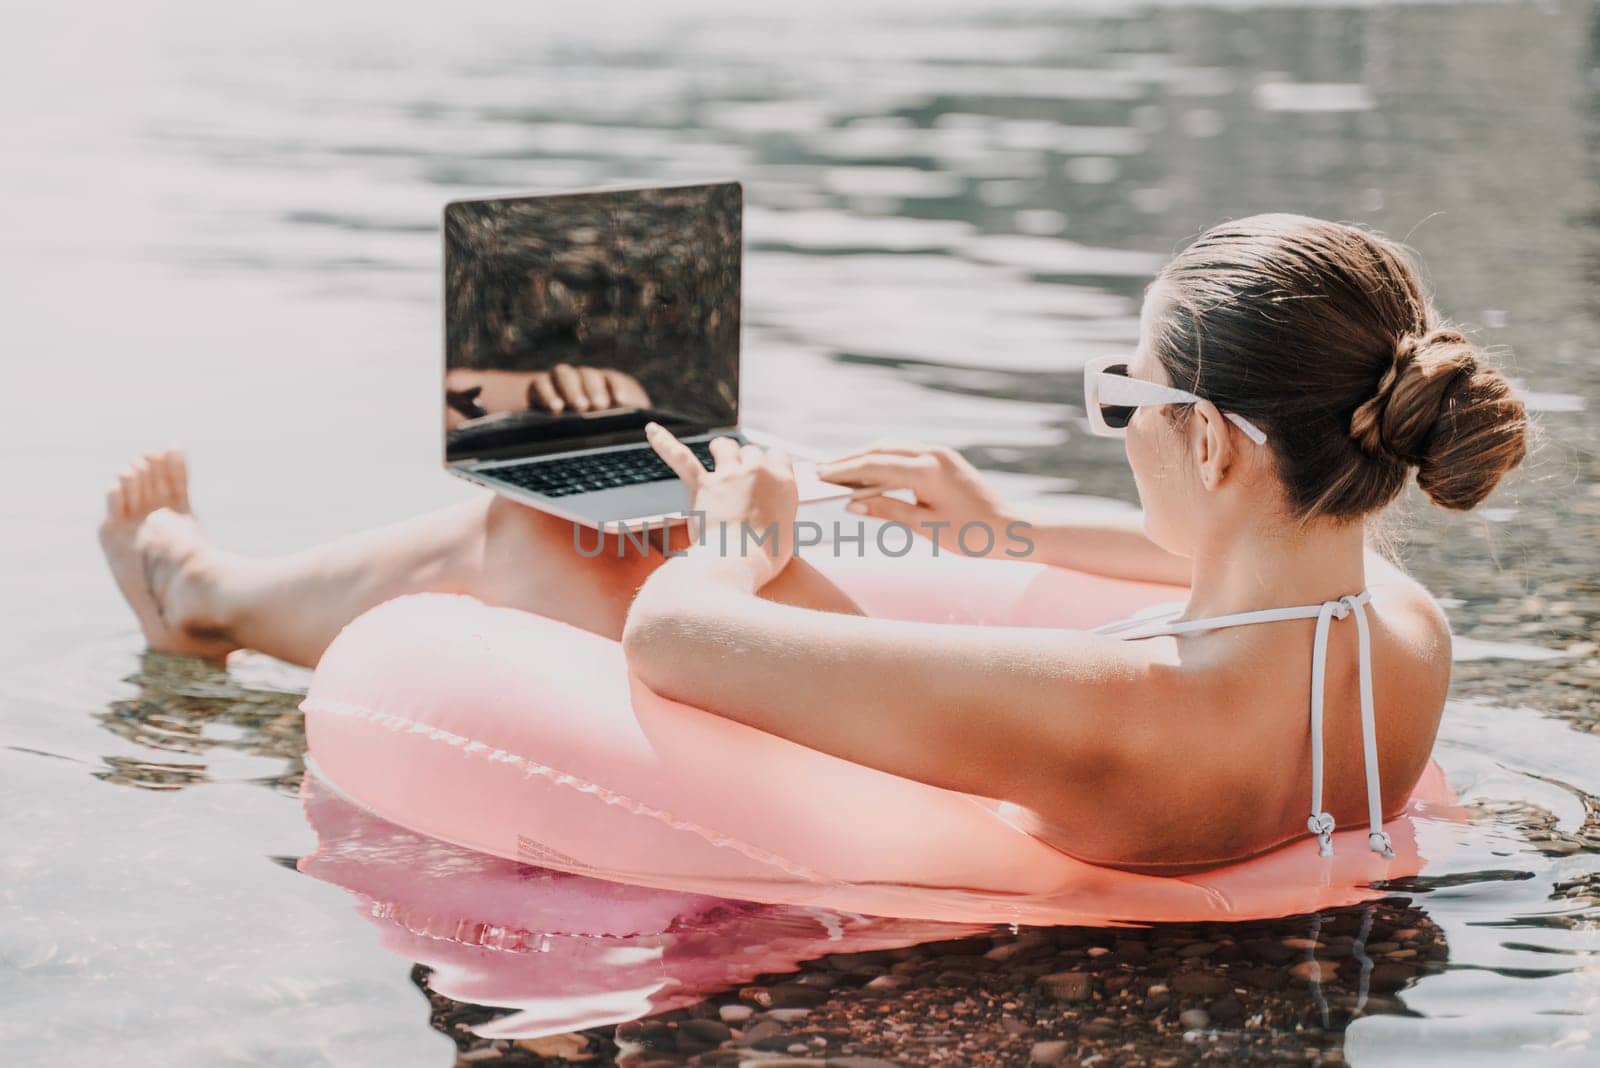 A woman is floating on a pink inflatable raft in the ocean while using a laptop. Concept of relaxation and leisure, as the woman enjoys her time in the water while working on her laptop